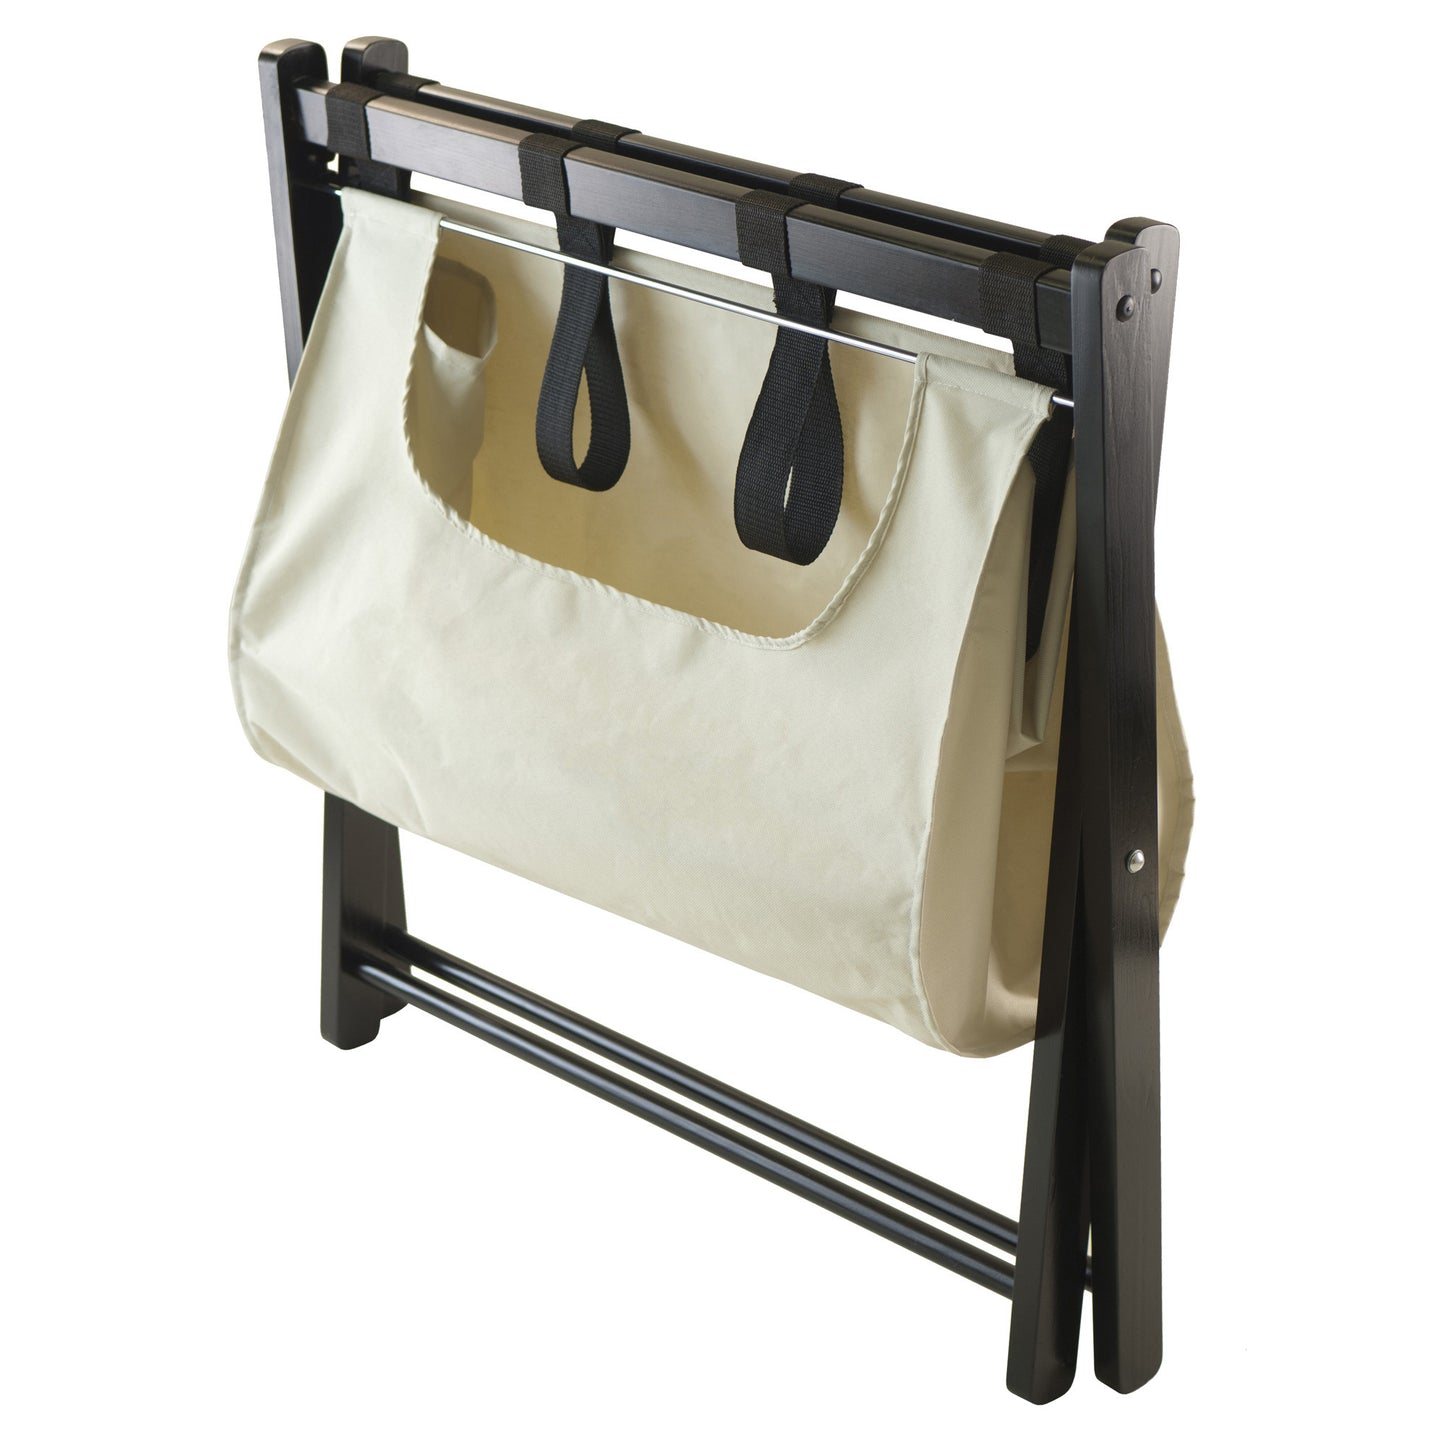 Dora Luggage Rack with removable fabric basket